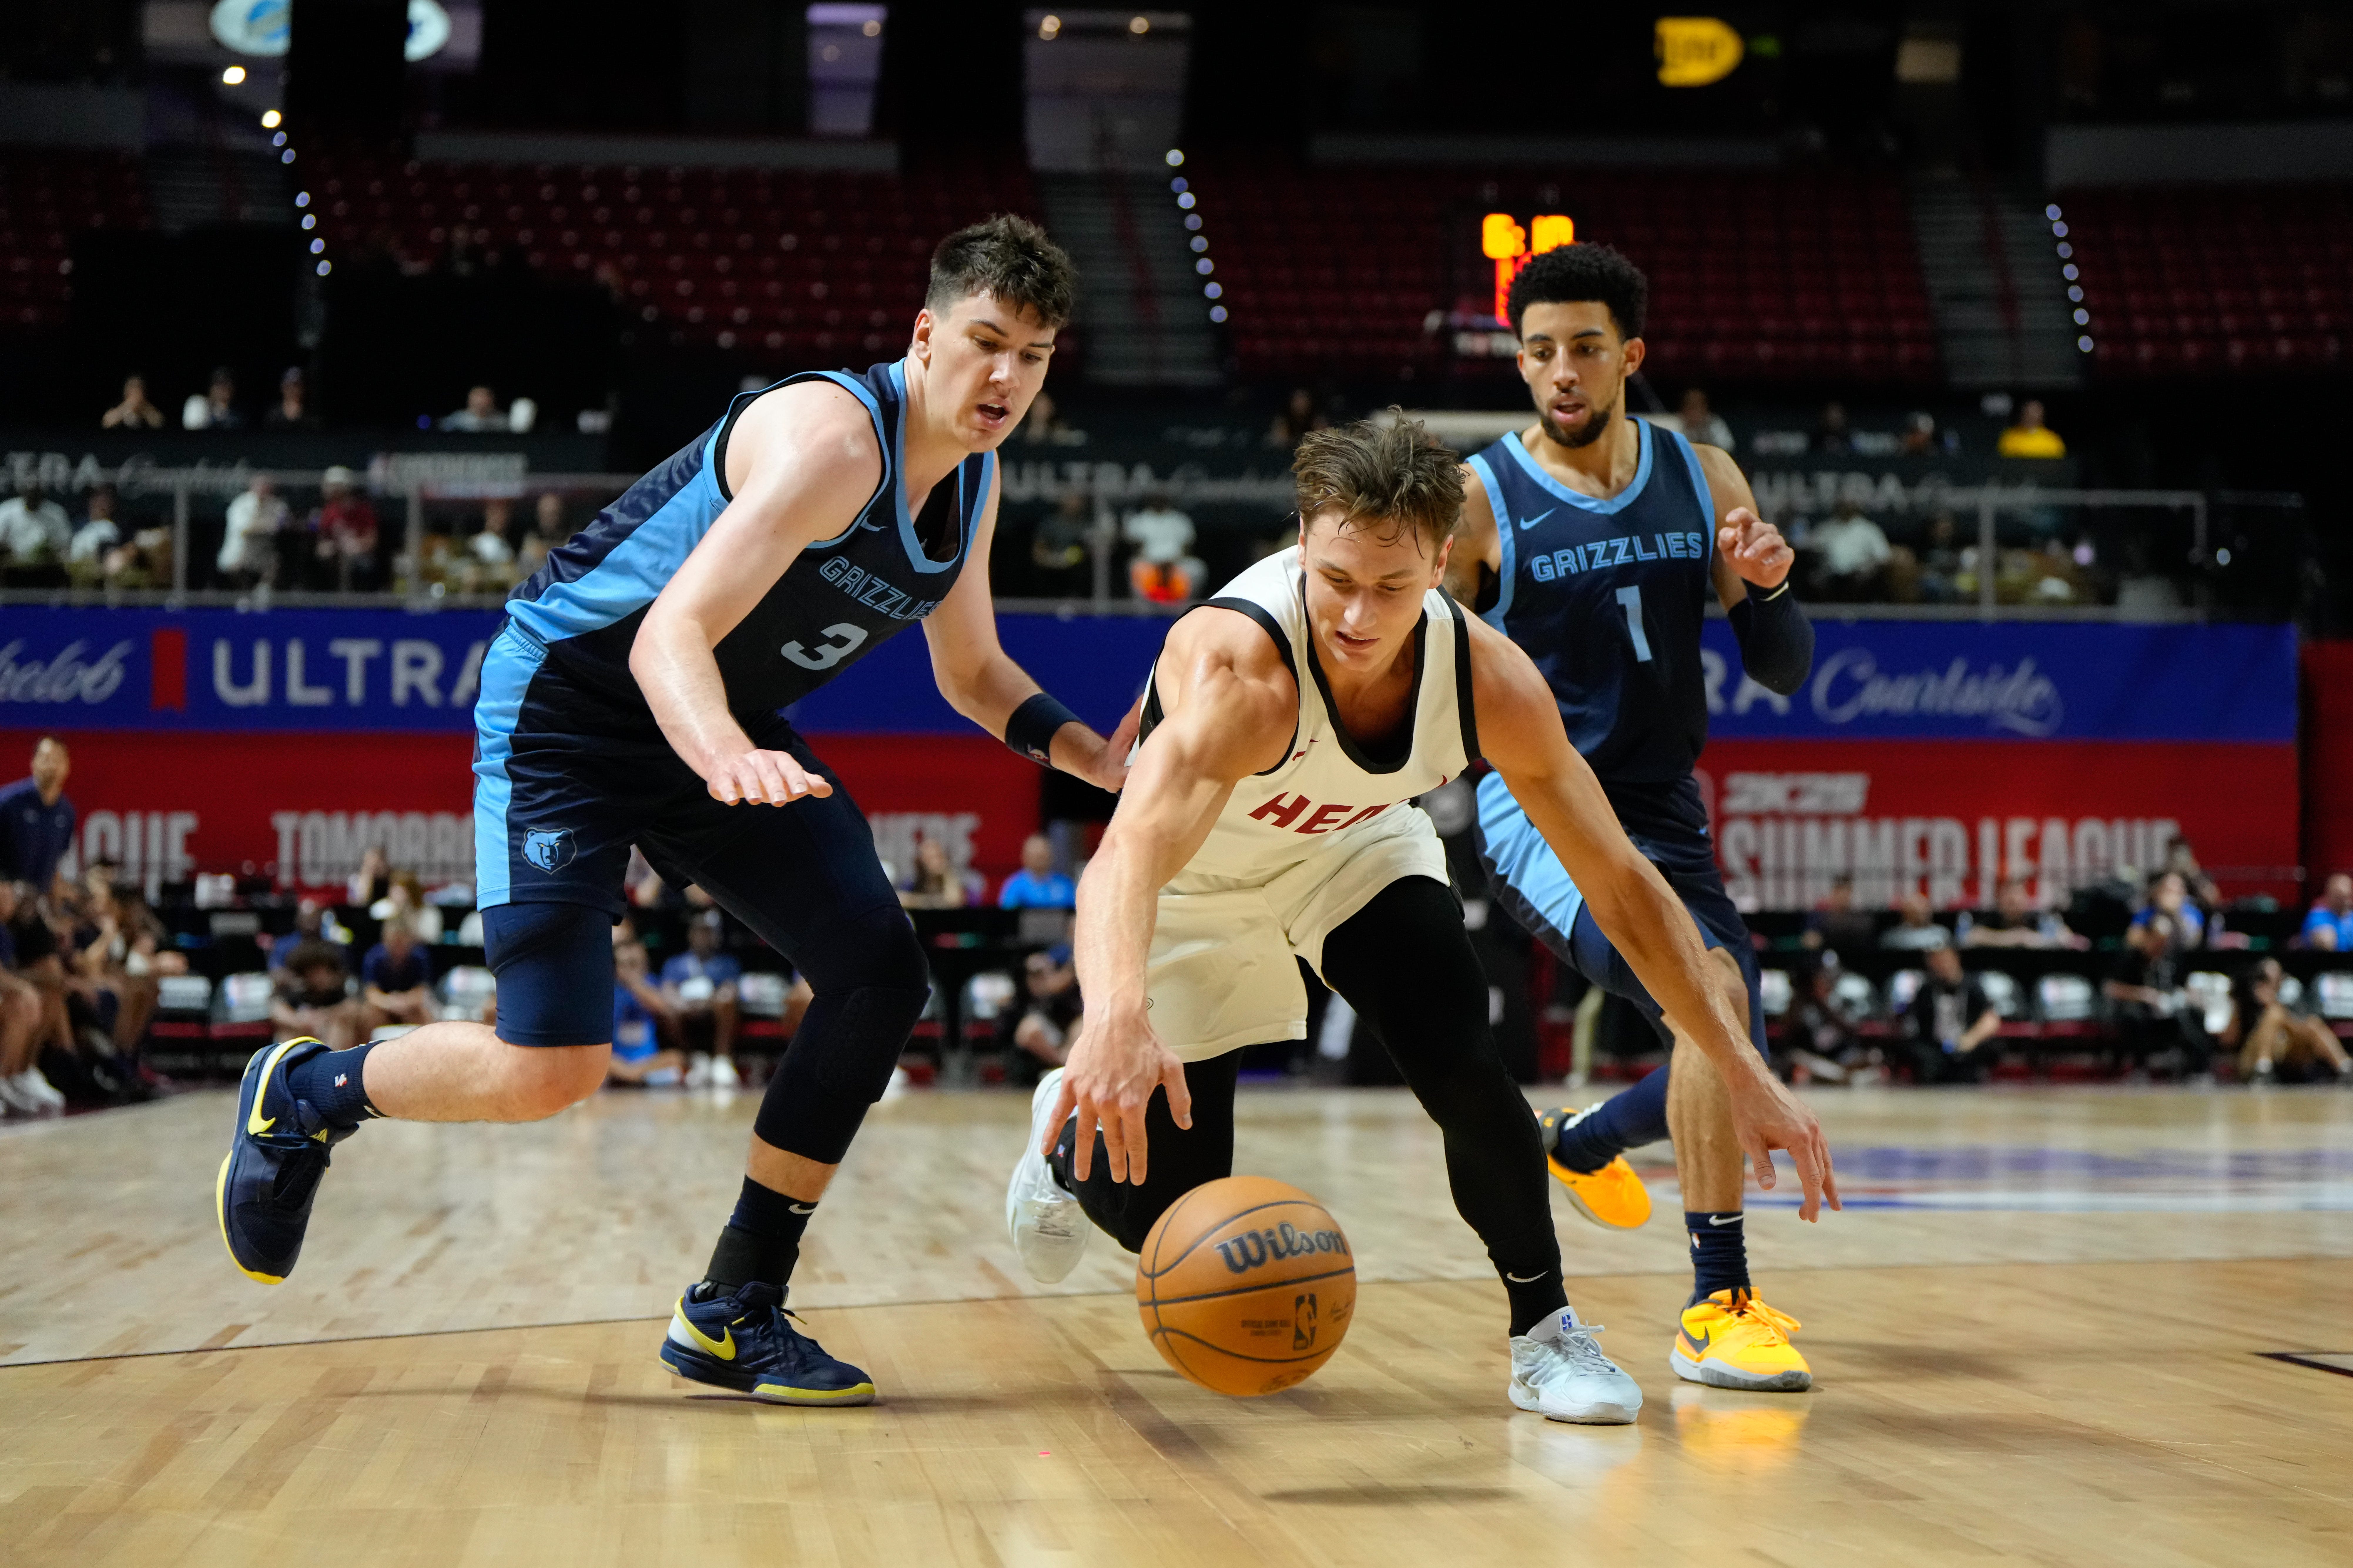 Jake LaRavia scores 32, but Memphis Grizzlies lose to Heat in OT in NBA summer league title game